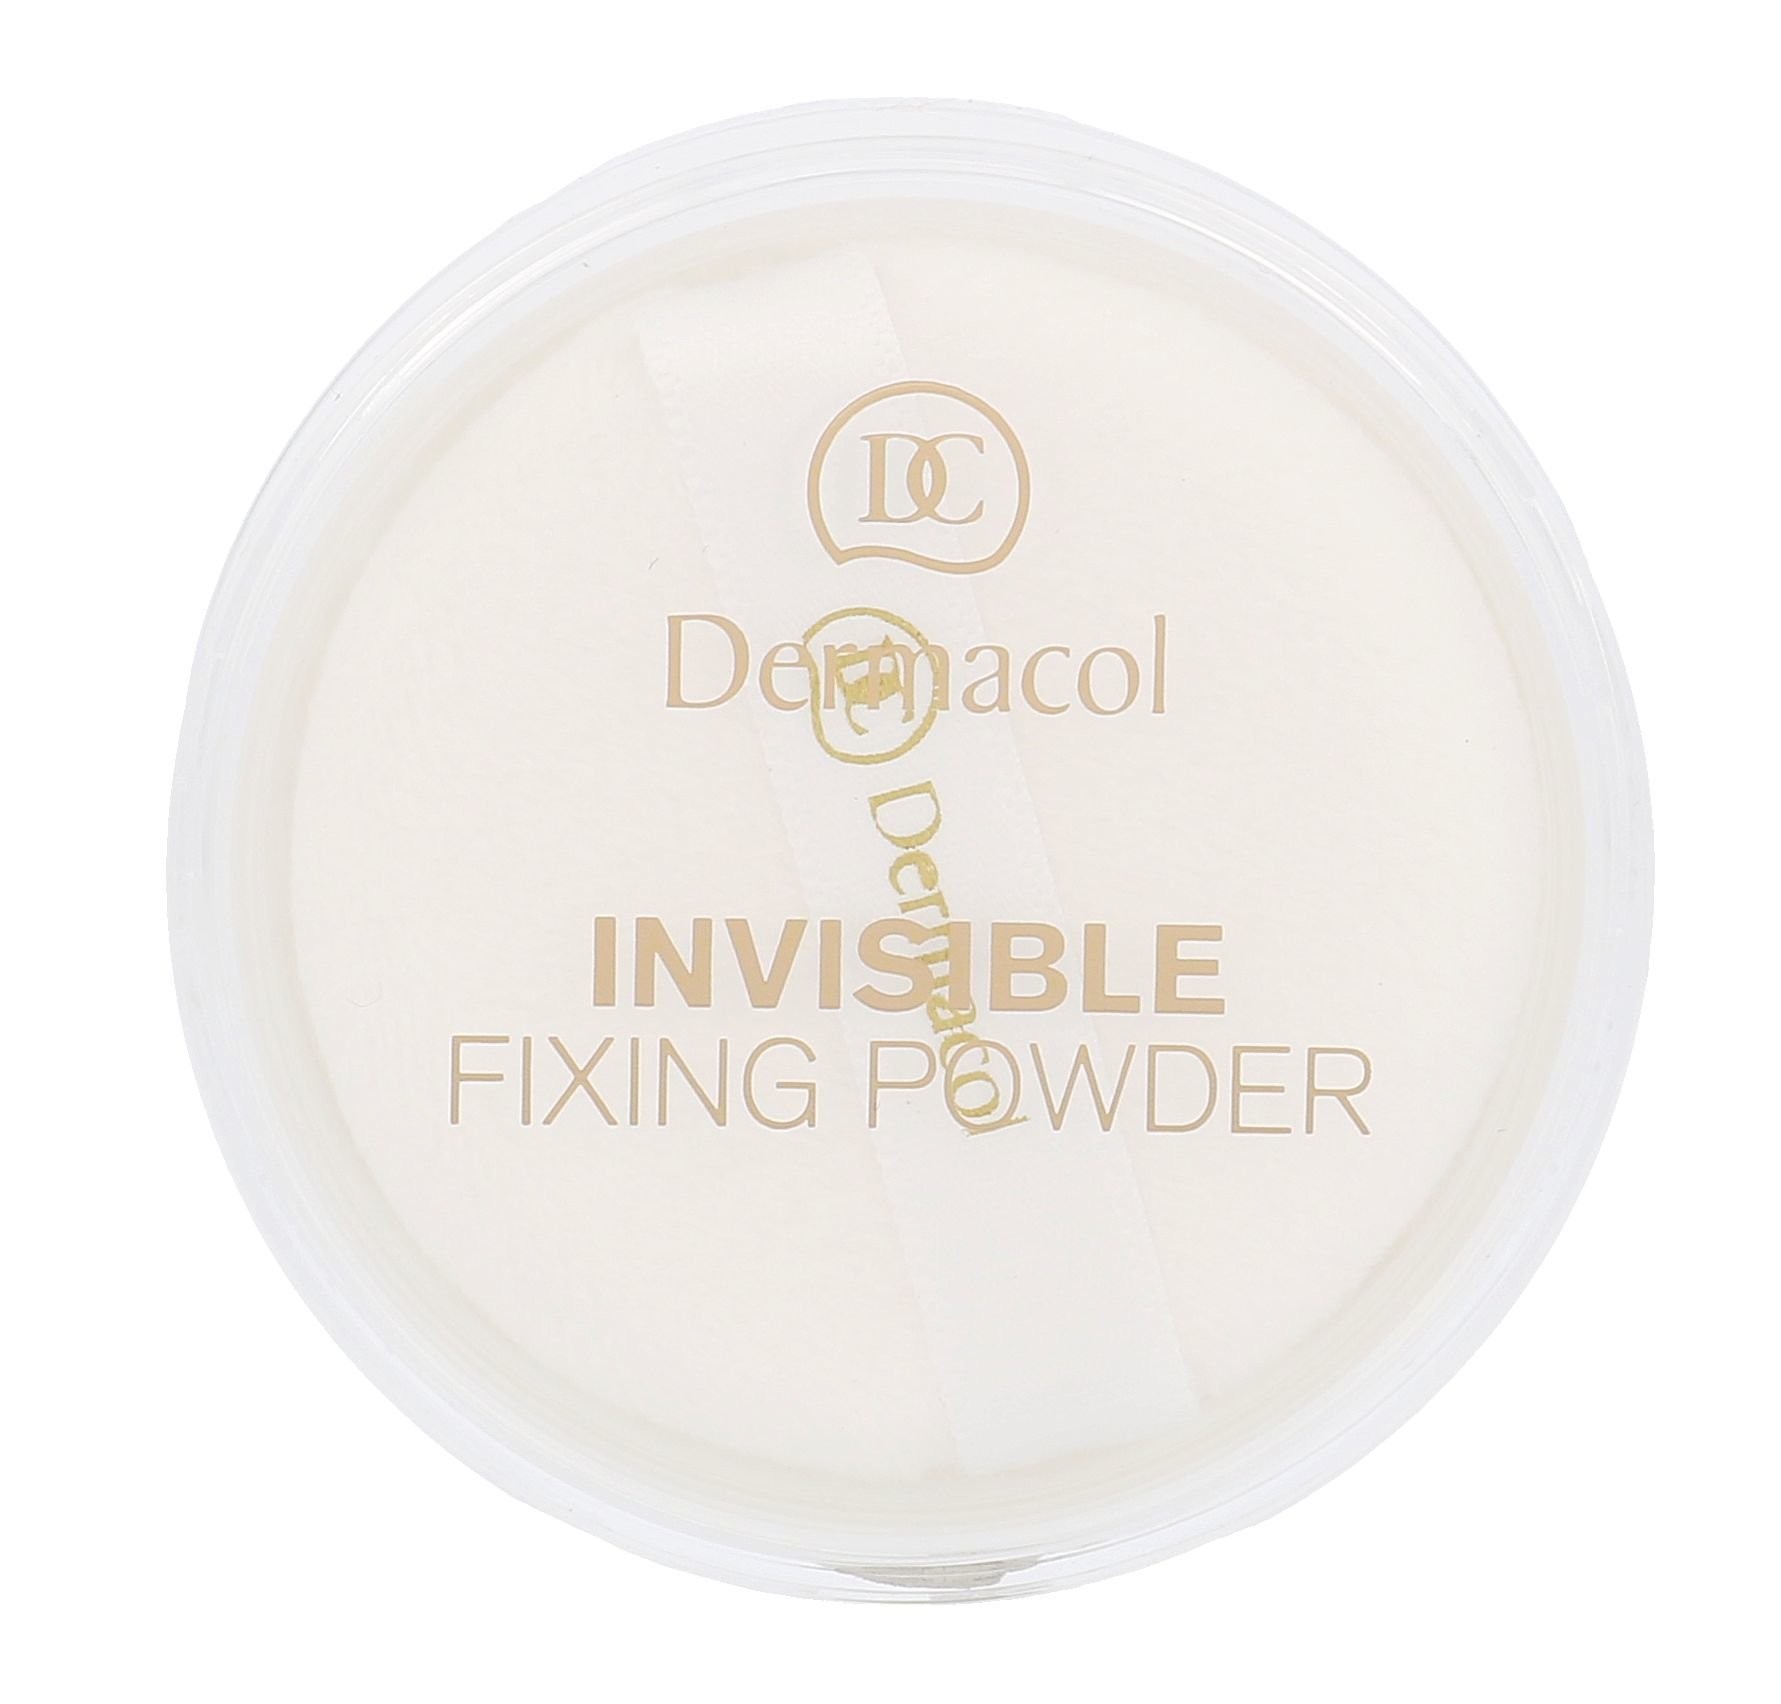 Dermacol Invisible Fixing Powder sausa pudra